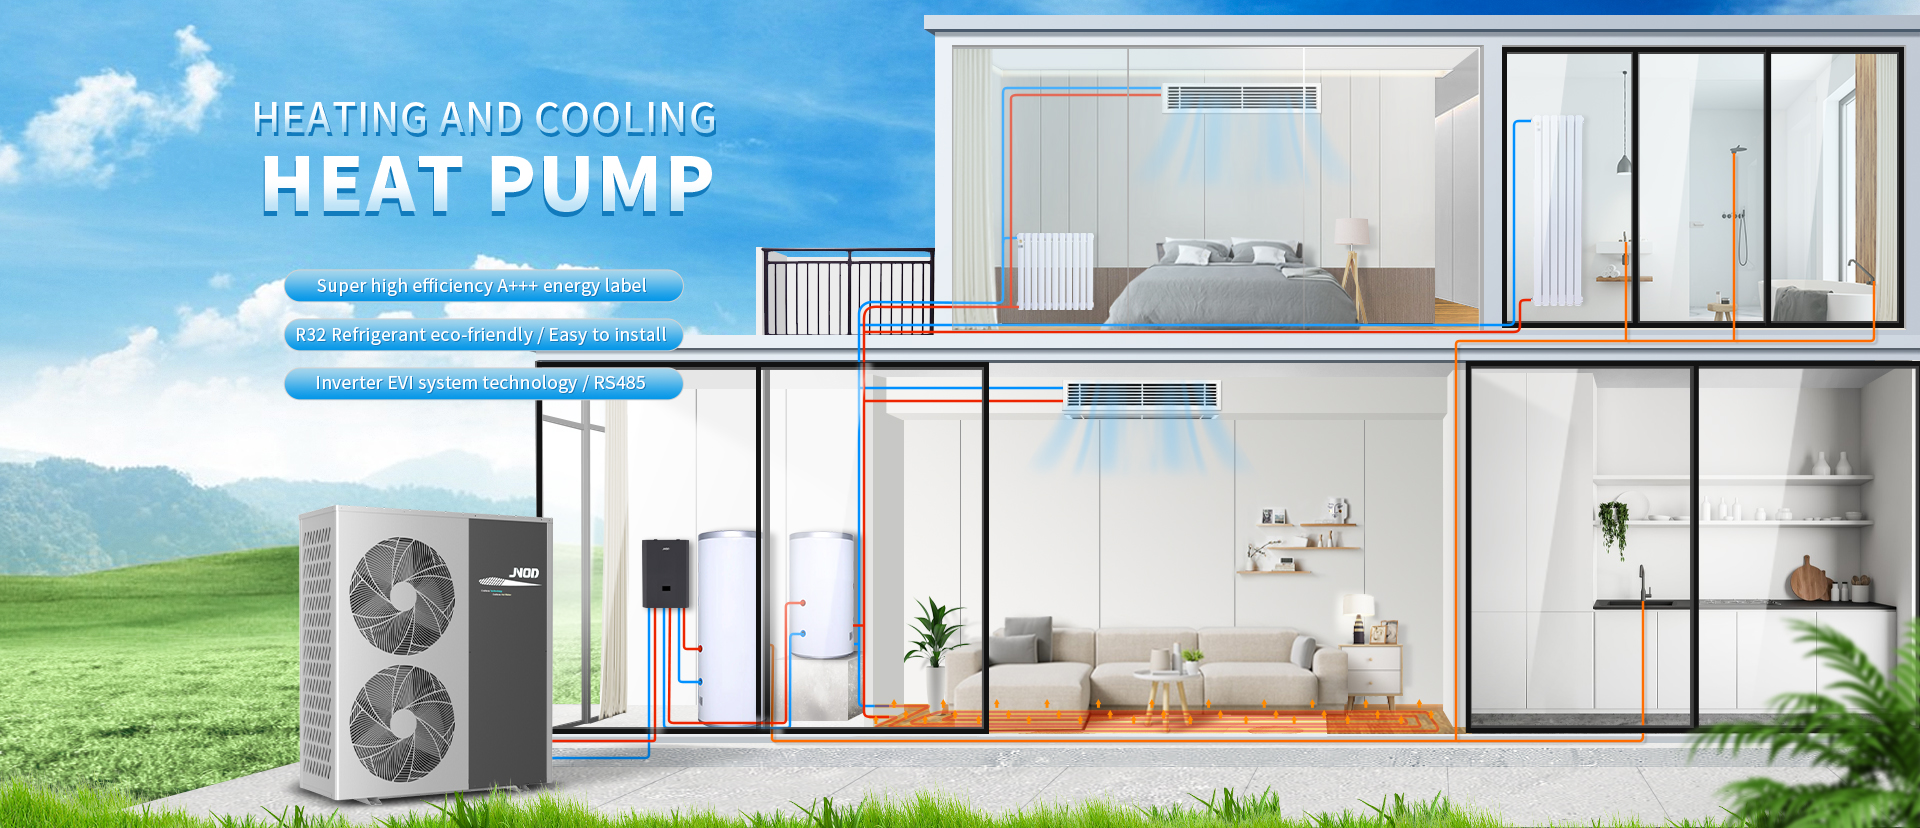 Heating And Cooling Heat Pump import